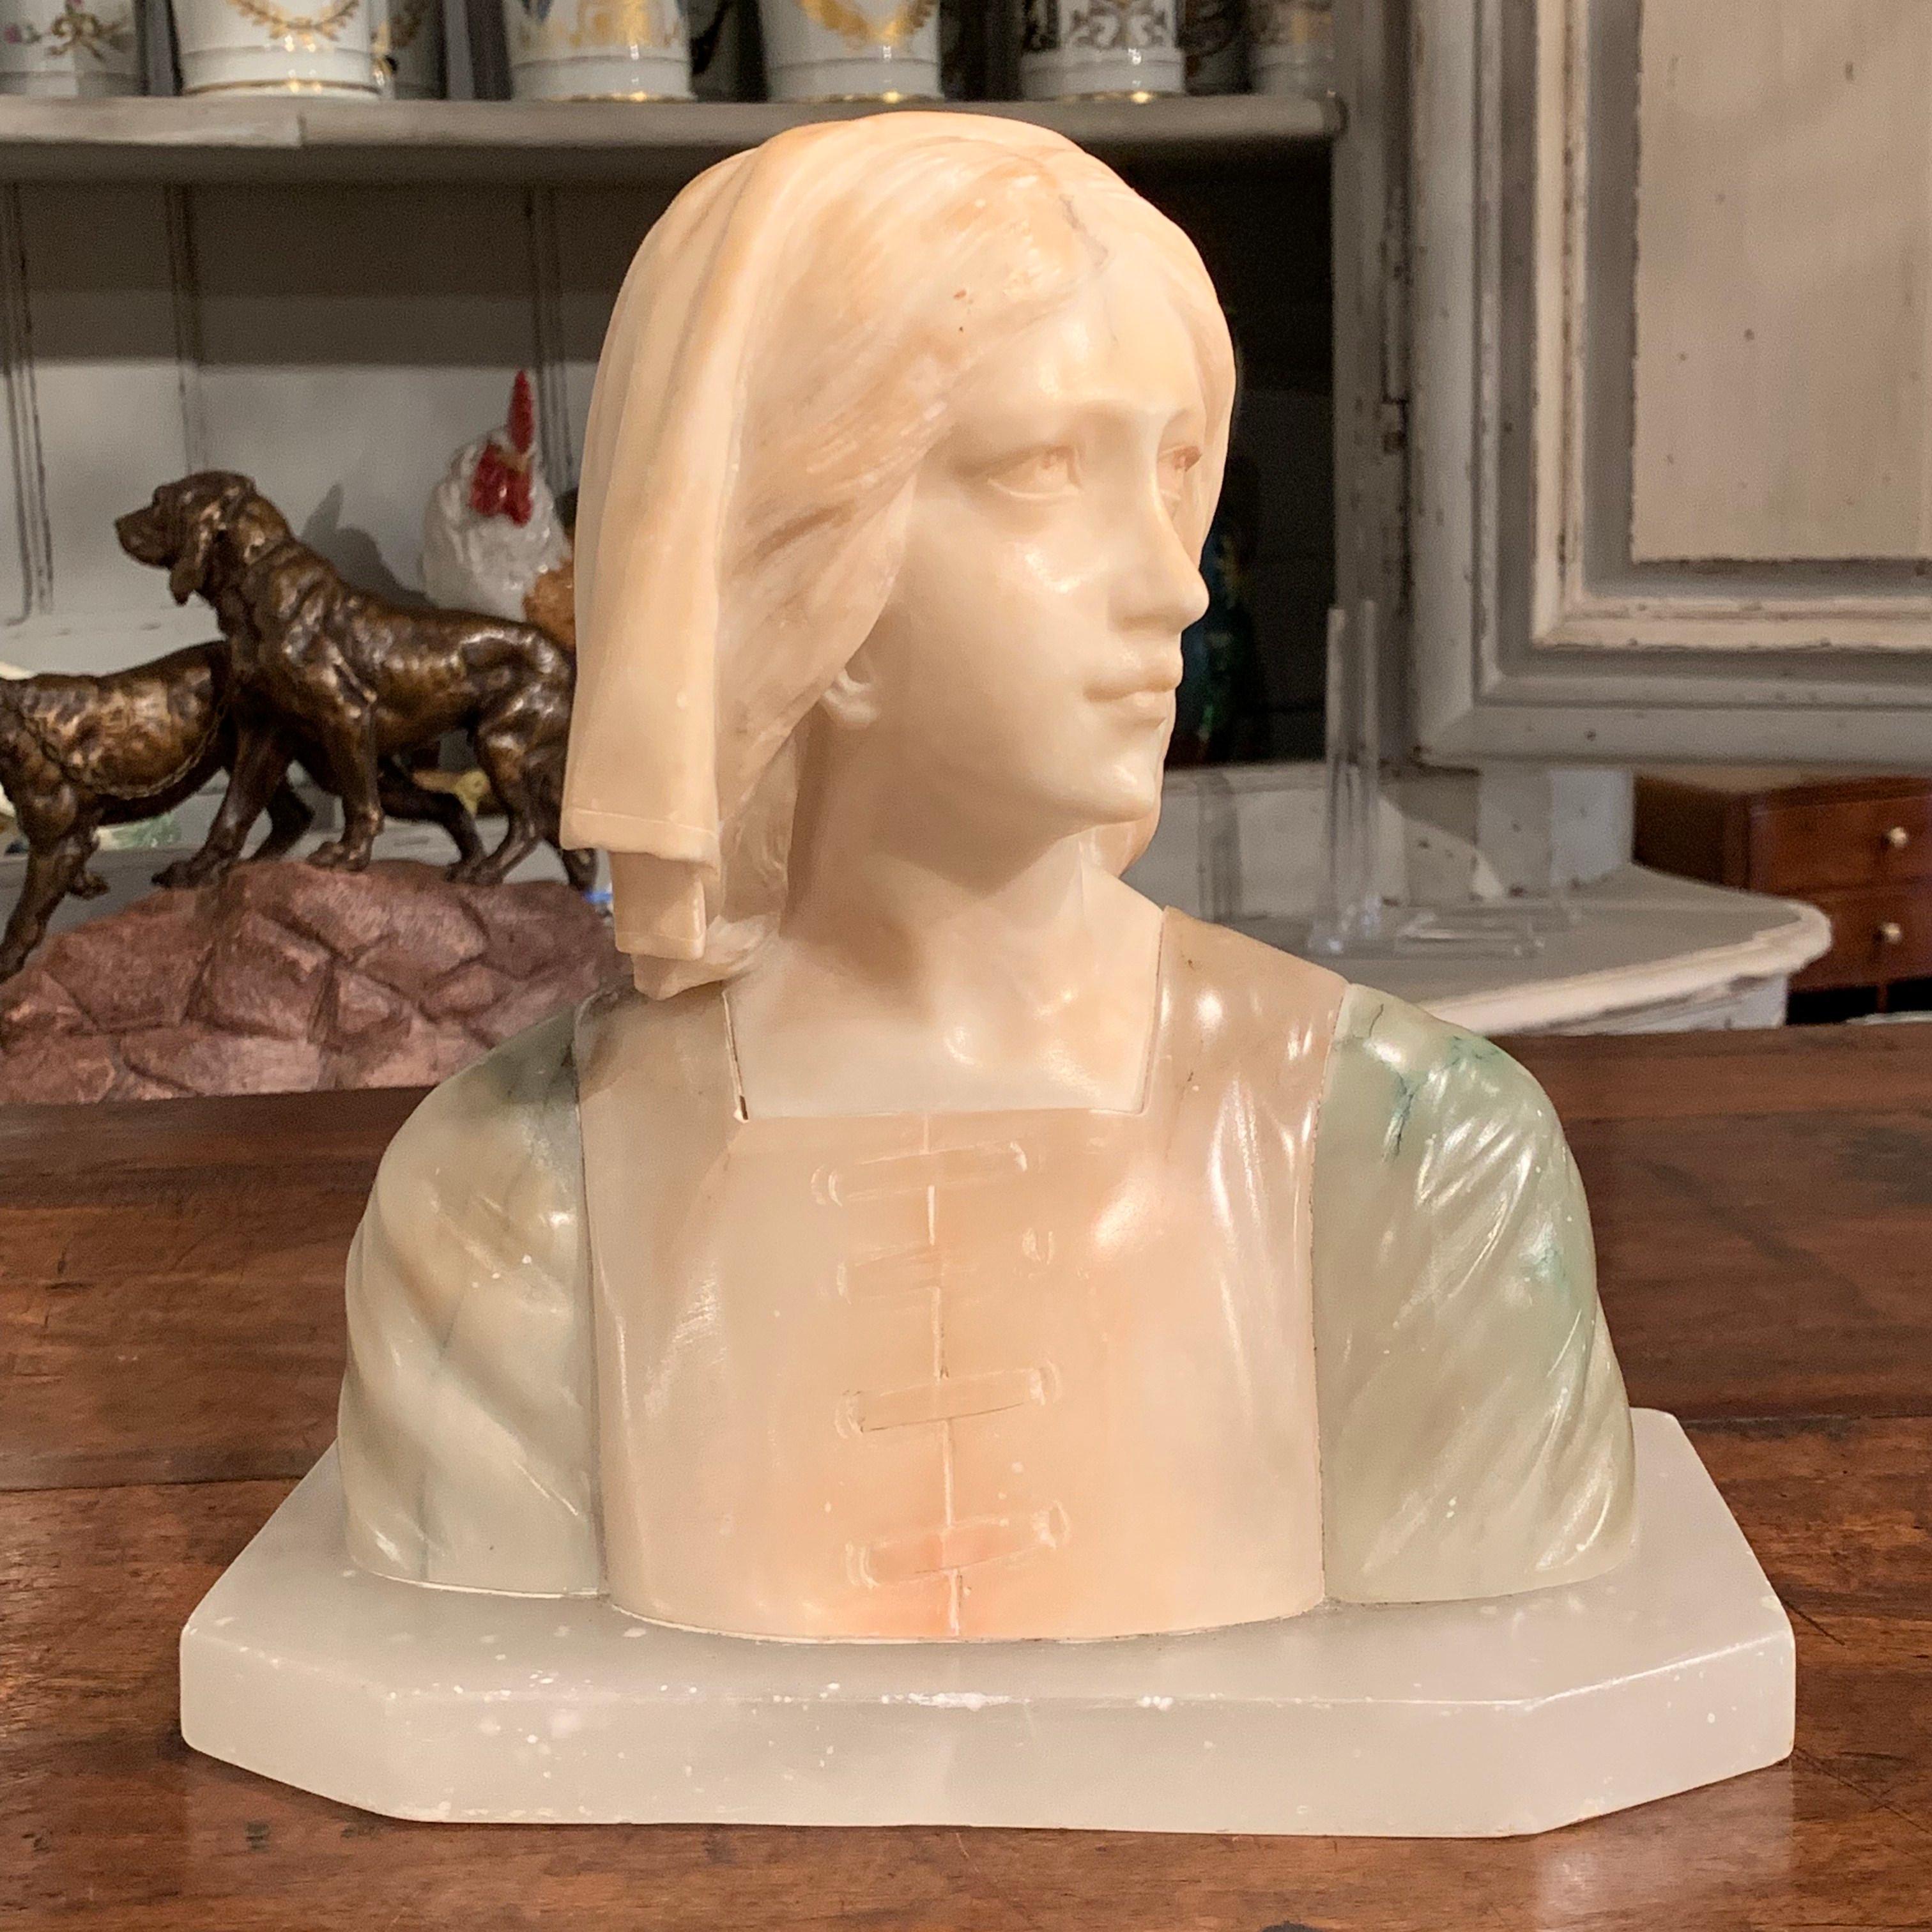 Decorate a shelf or desk with this antique, two-tone marble bust on flat base. Created in France circa 1920, the sculpture features a young woman looking to the side dressed in pre-20th century clothing and a head scarf. The body and base are both